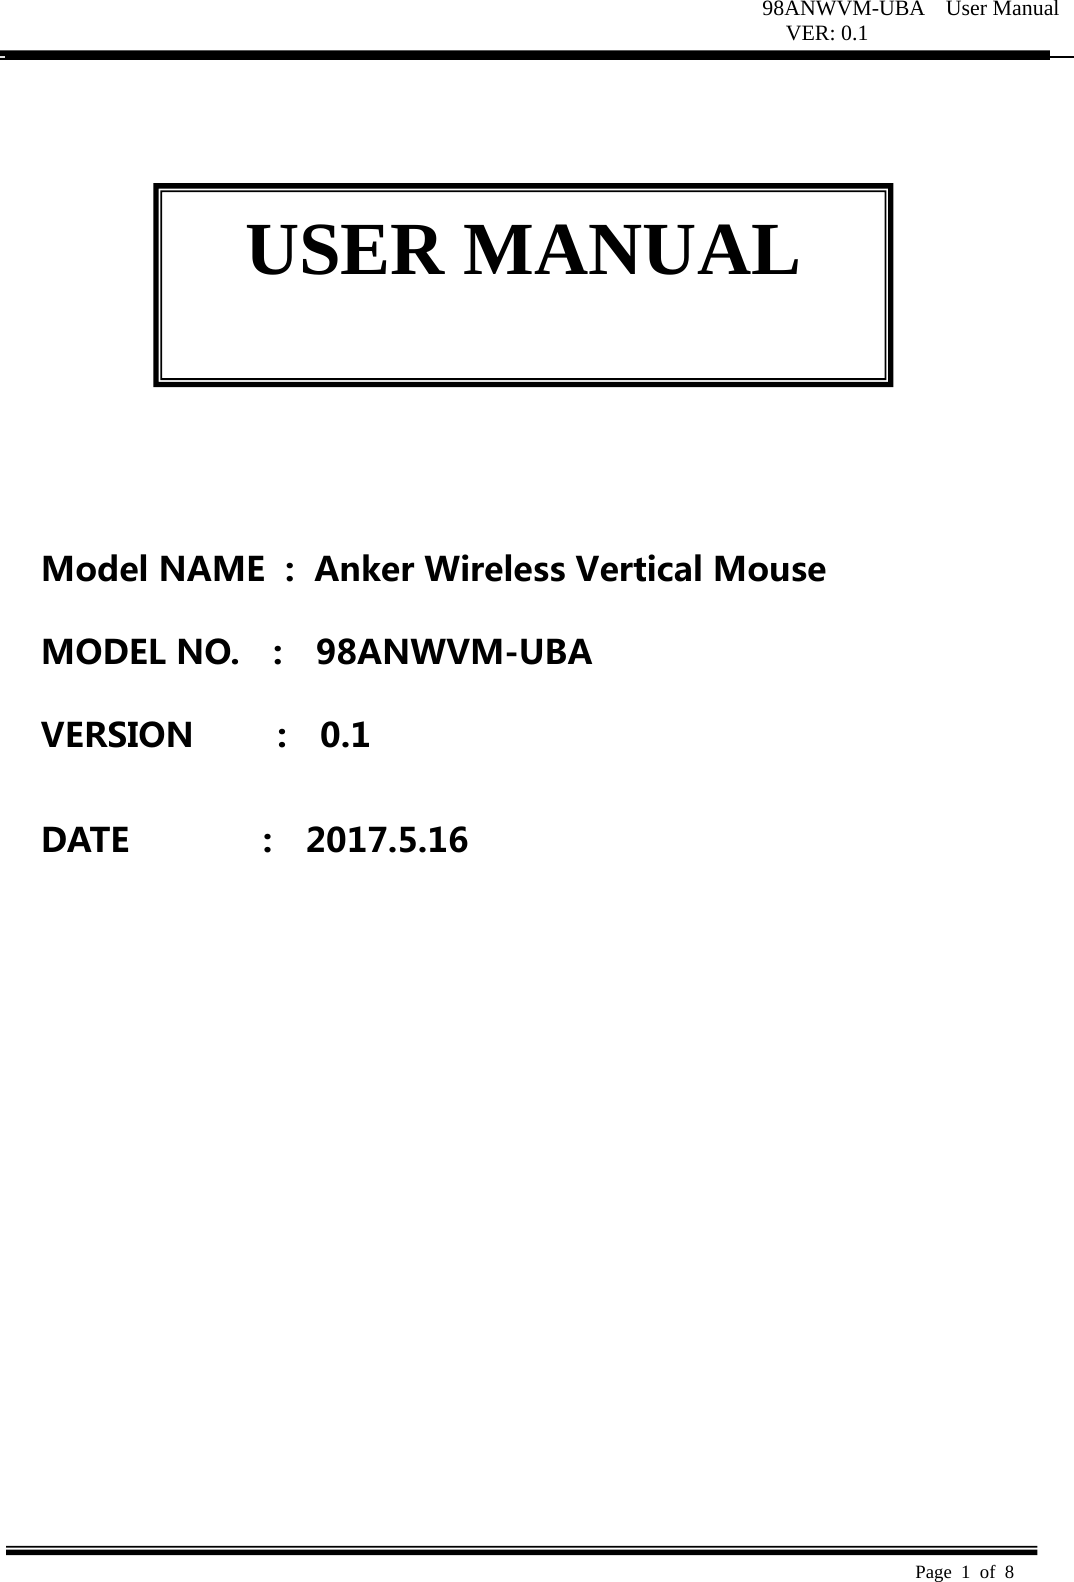 98ANWVM-UBA  User Manual VER: 0.1  Page 1 of 8            ModelNAME:AnkerWirelessVerticalMouseMODELNO.  :  98ANWVM-UBAVERSION:0.1DATE:2017.5.16USER MANUAL 